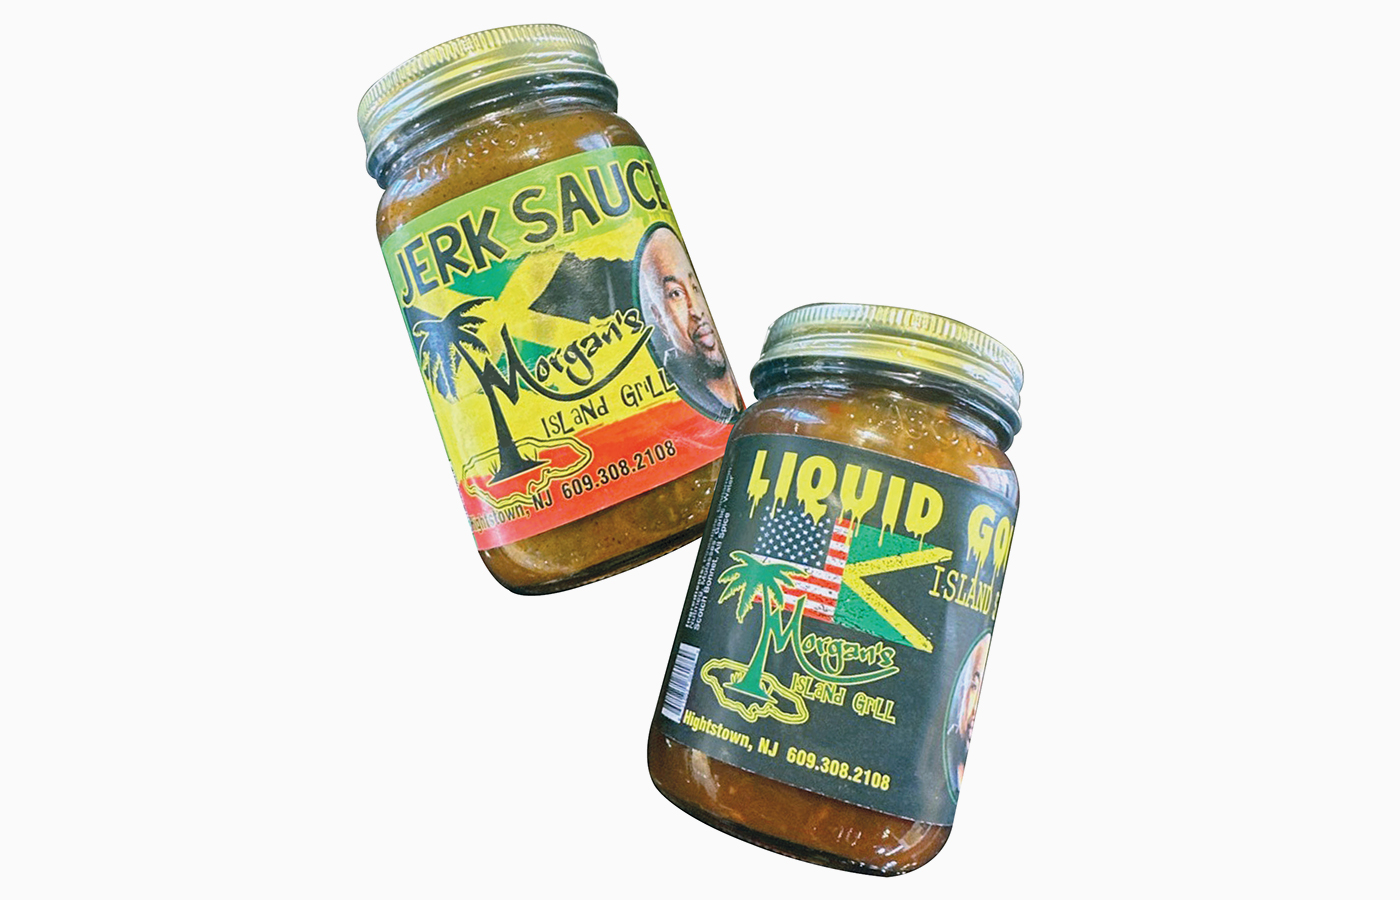 Liquid Gold and Jerk Sauce from Morgan's Island Grill